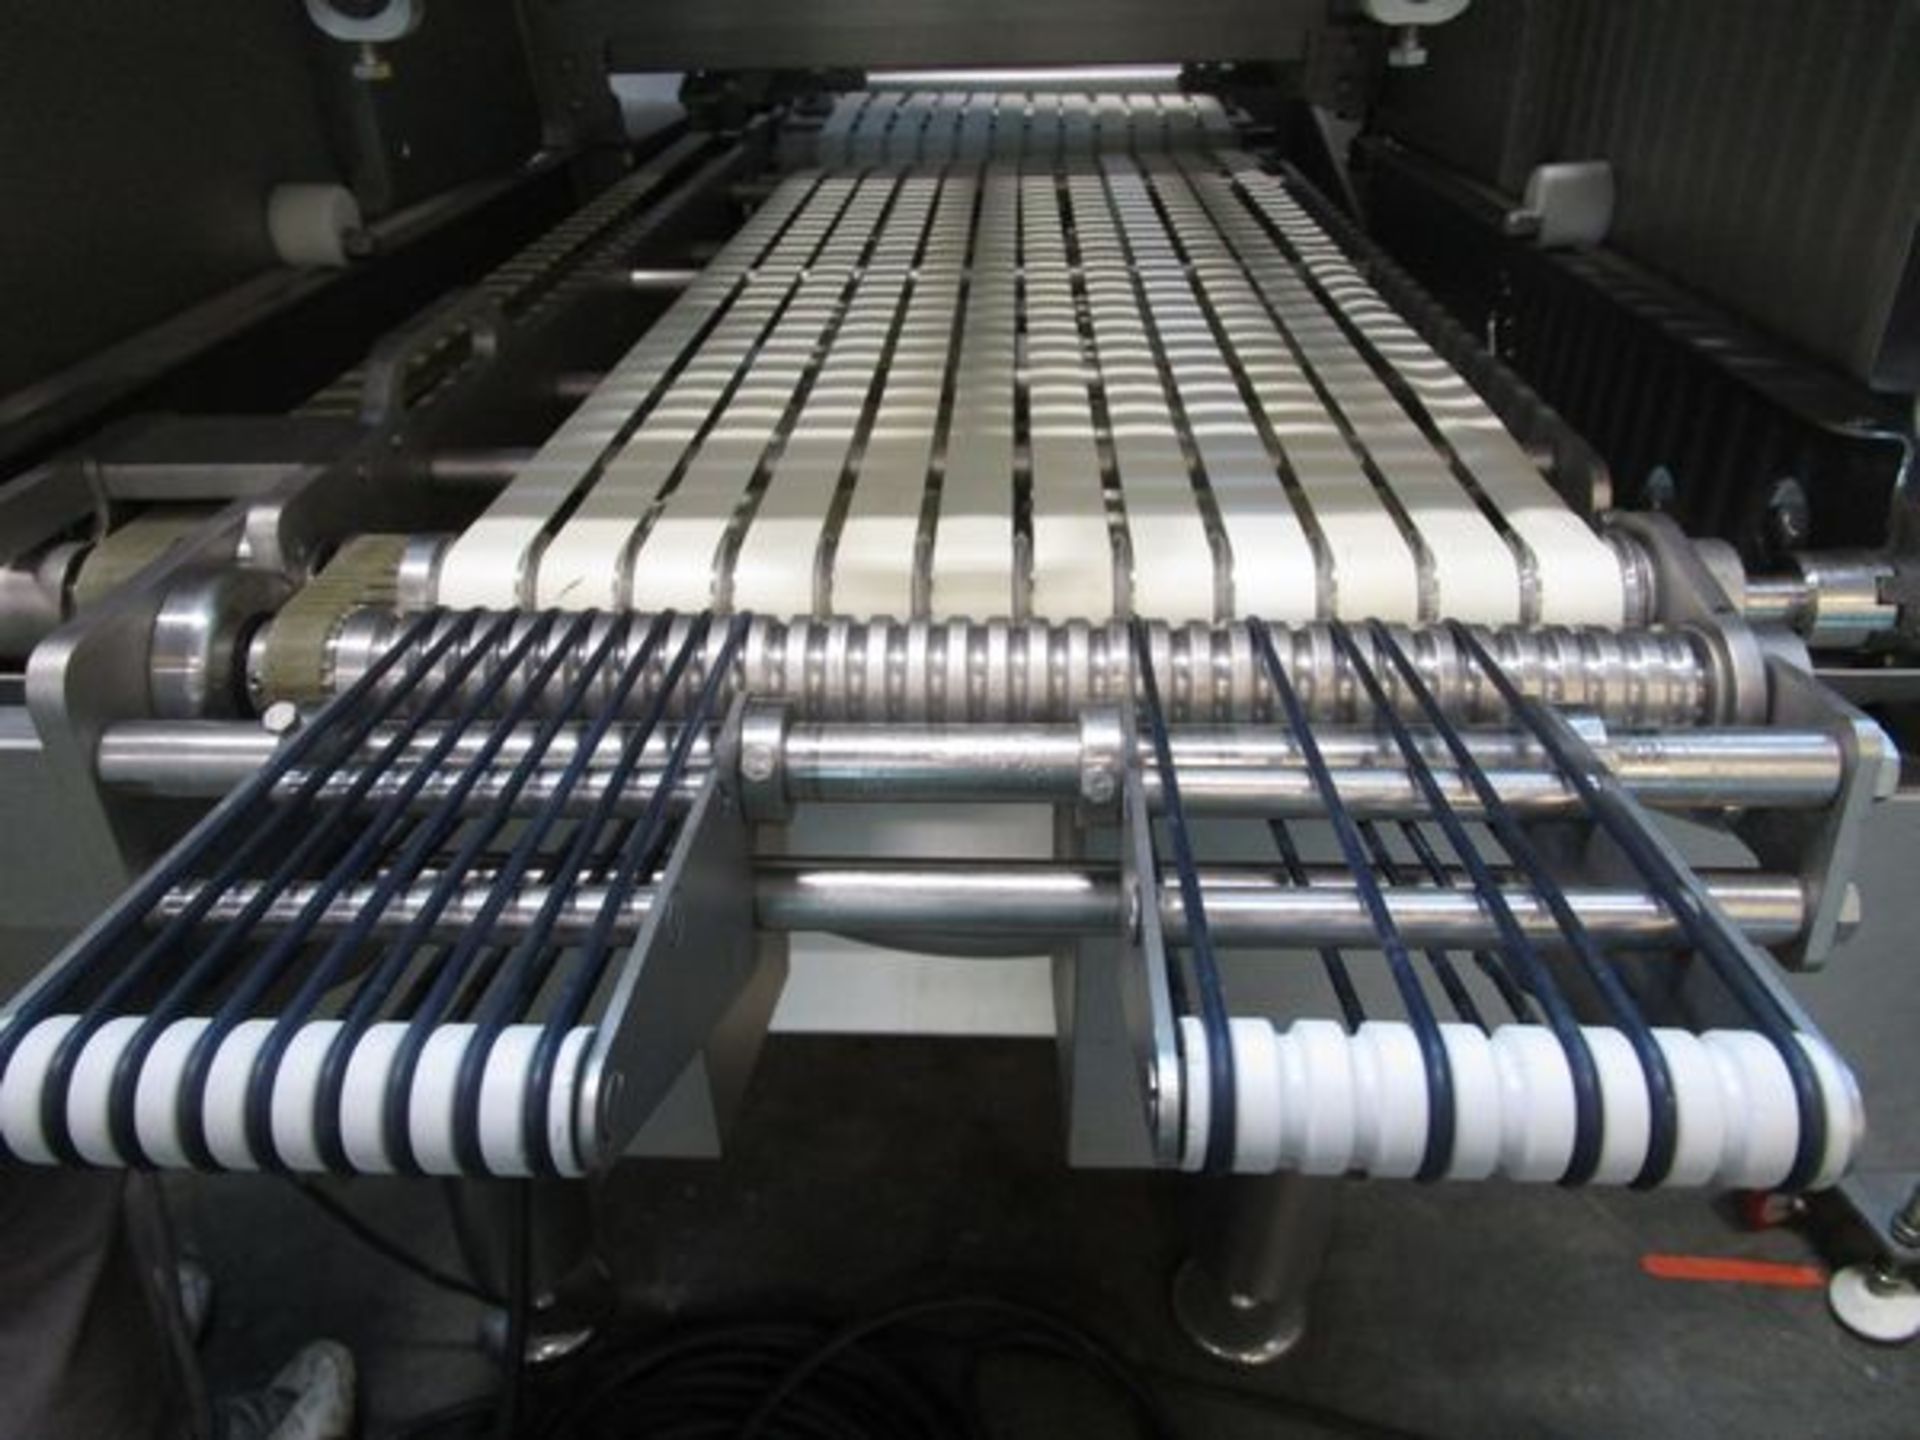 2014 Trief Divider 660+ Meat and Cheese Log Slicers for Market Ready Slices, | Rigging Fee: $1250 - Image 2 of 13